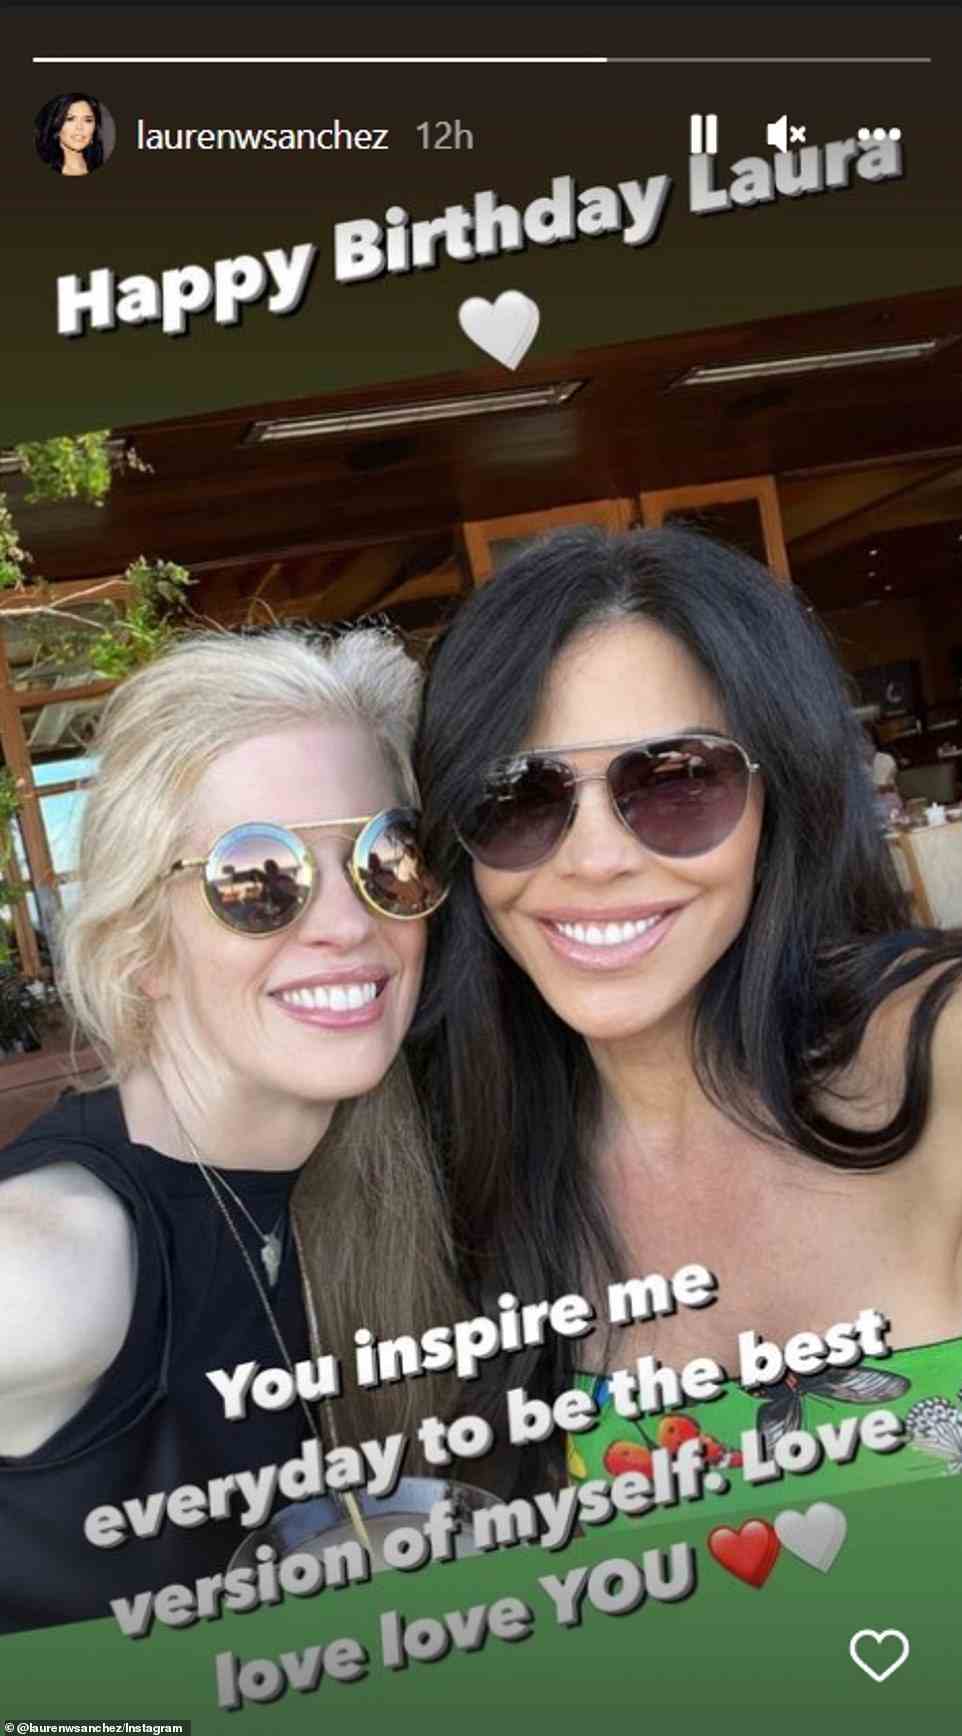 Sanchez took a selfie with her friend Laura during the dinner and later posted it on Instagram to wish her a happy birthday